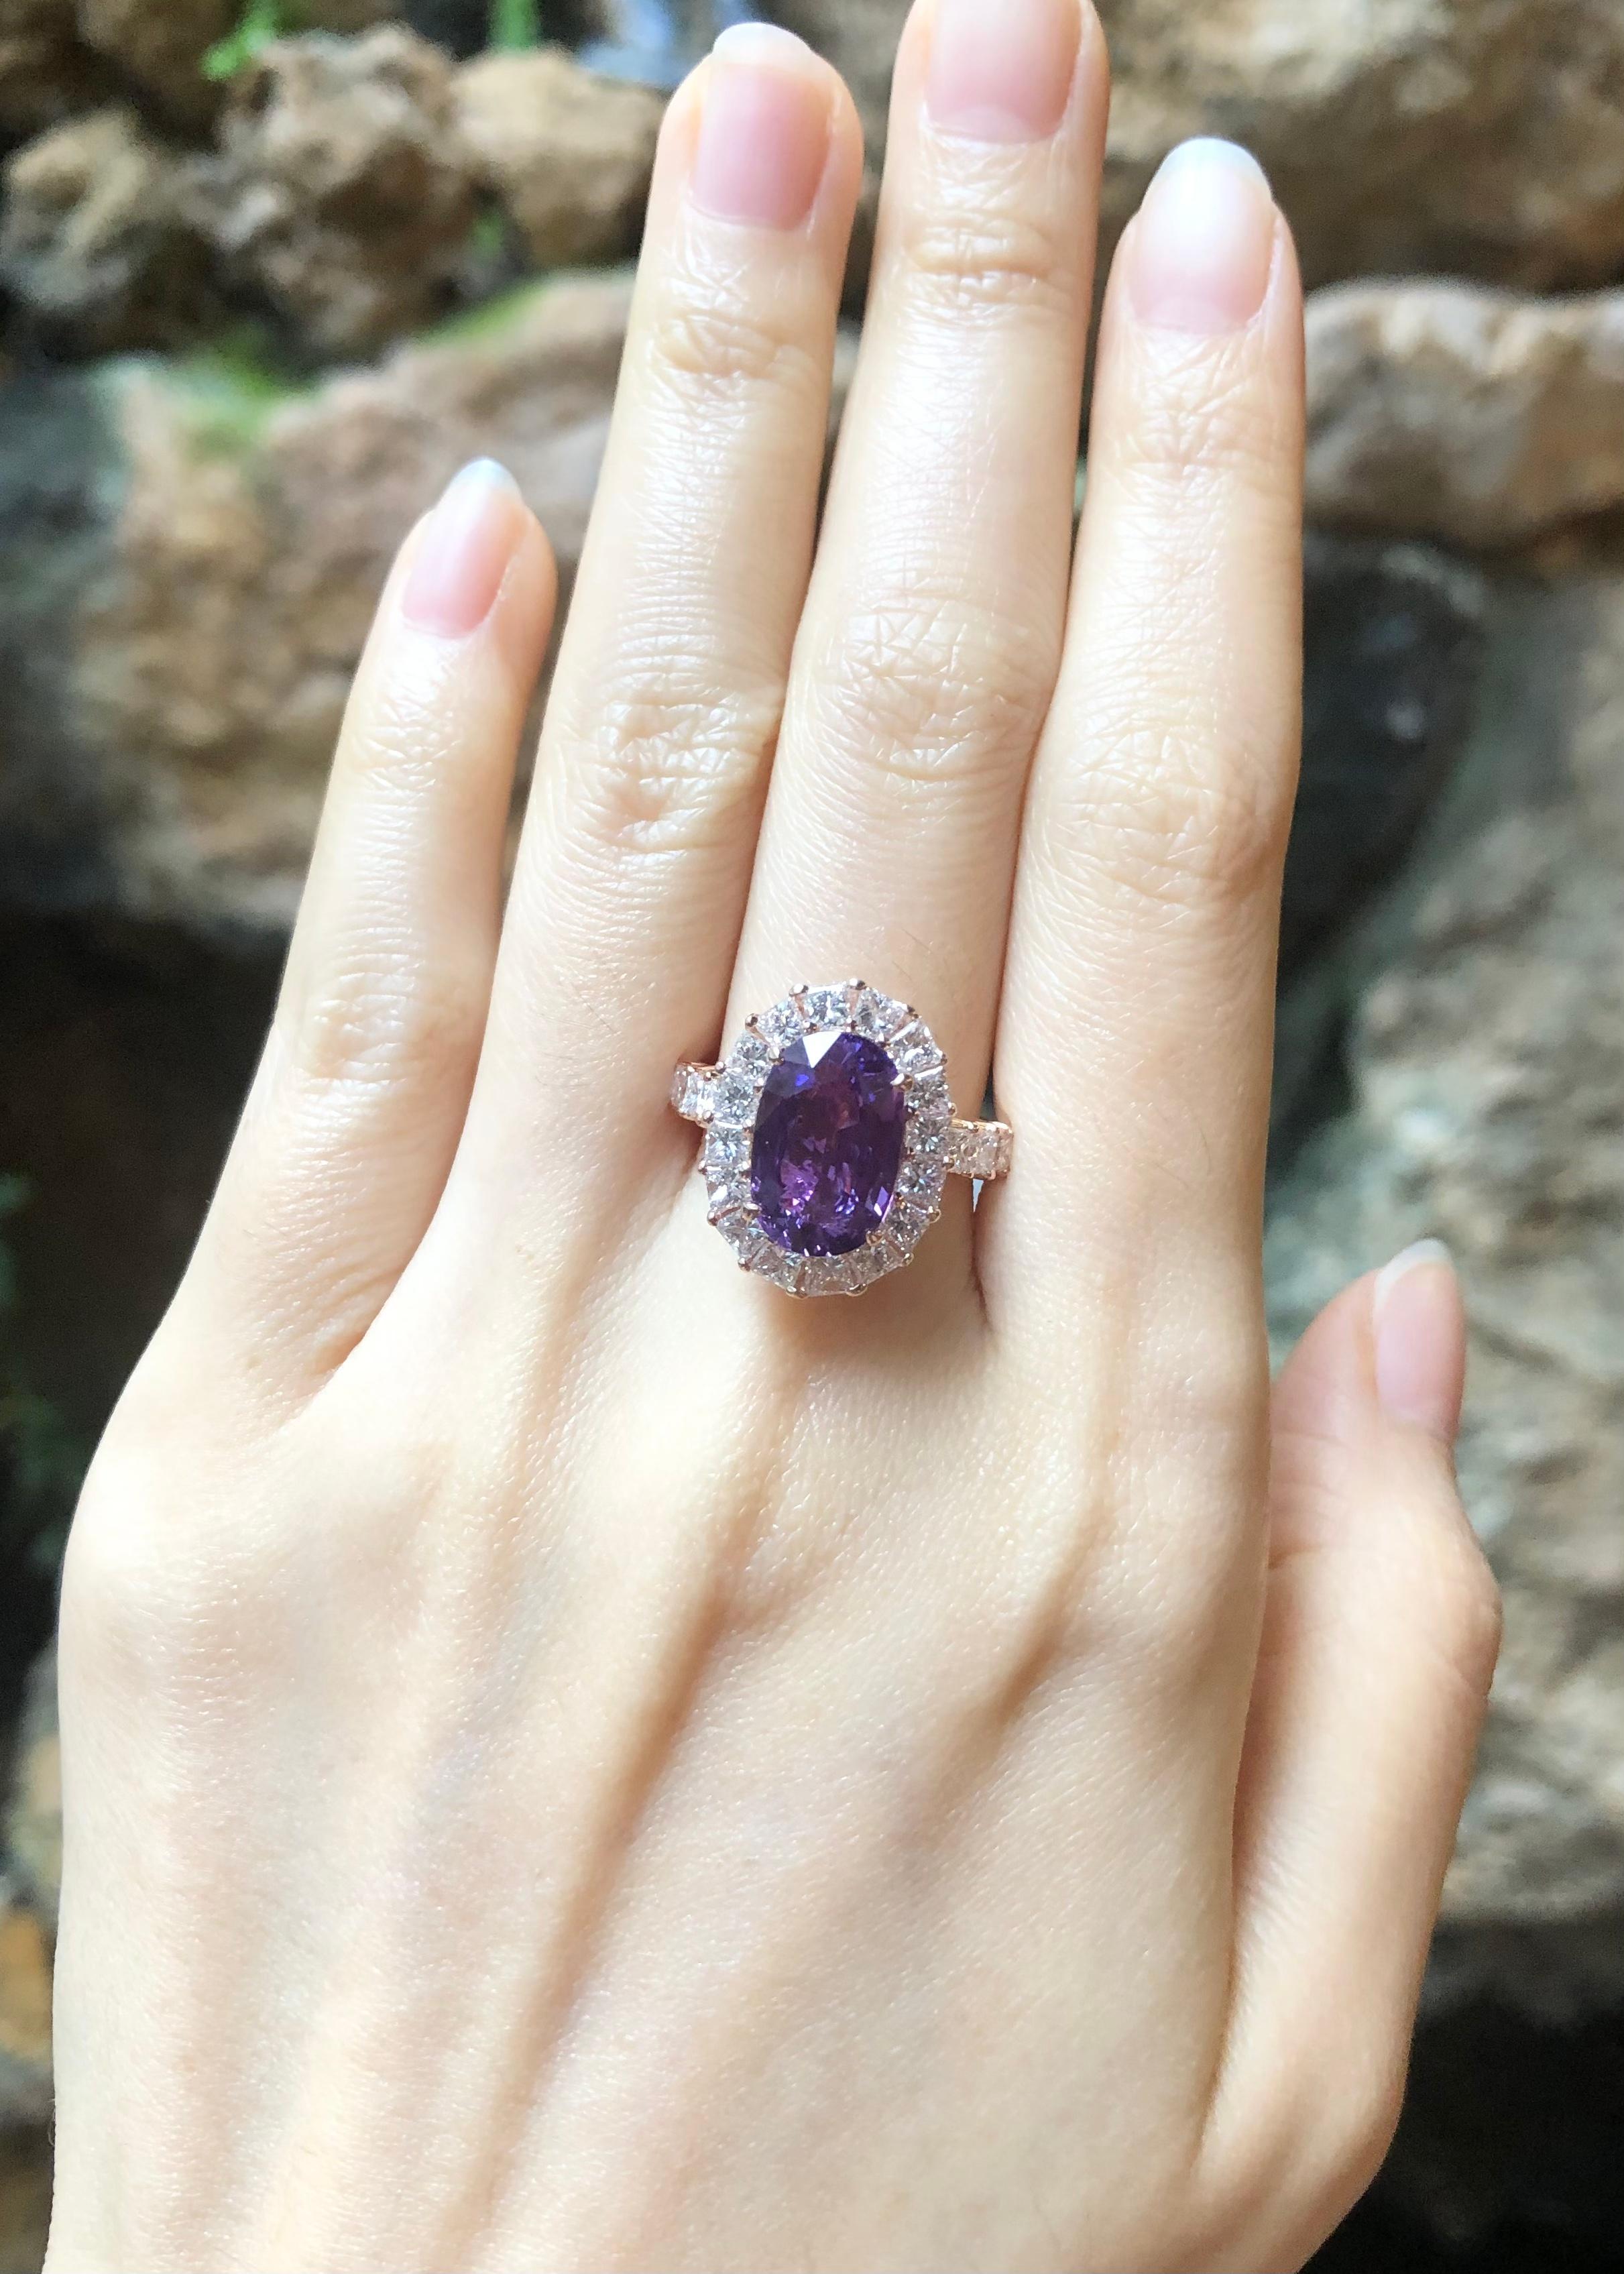 Purple Sapphire 5.11 carats with Diamond 2.66 carats Ring set in 18K Rose Gold Settings

Width:  1.4 cm 
Length: 1.8 cm
Ring Size: 52
Total Weight: 7.87 grams

